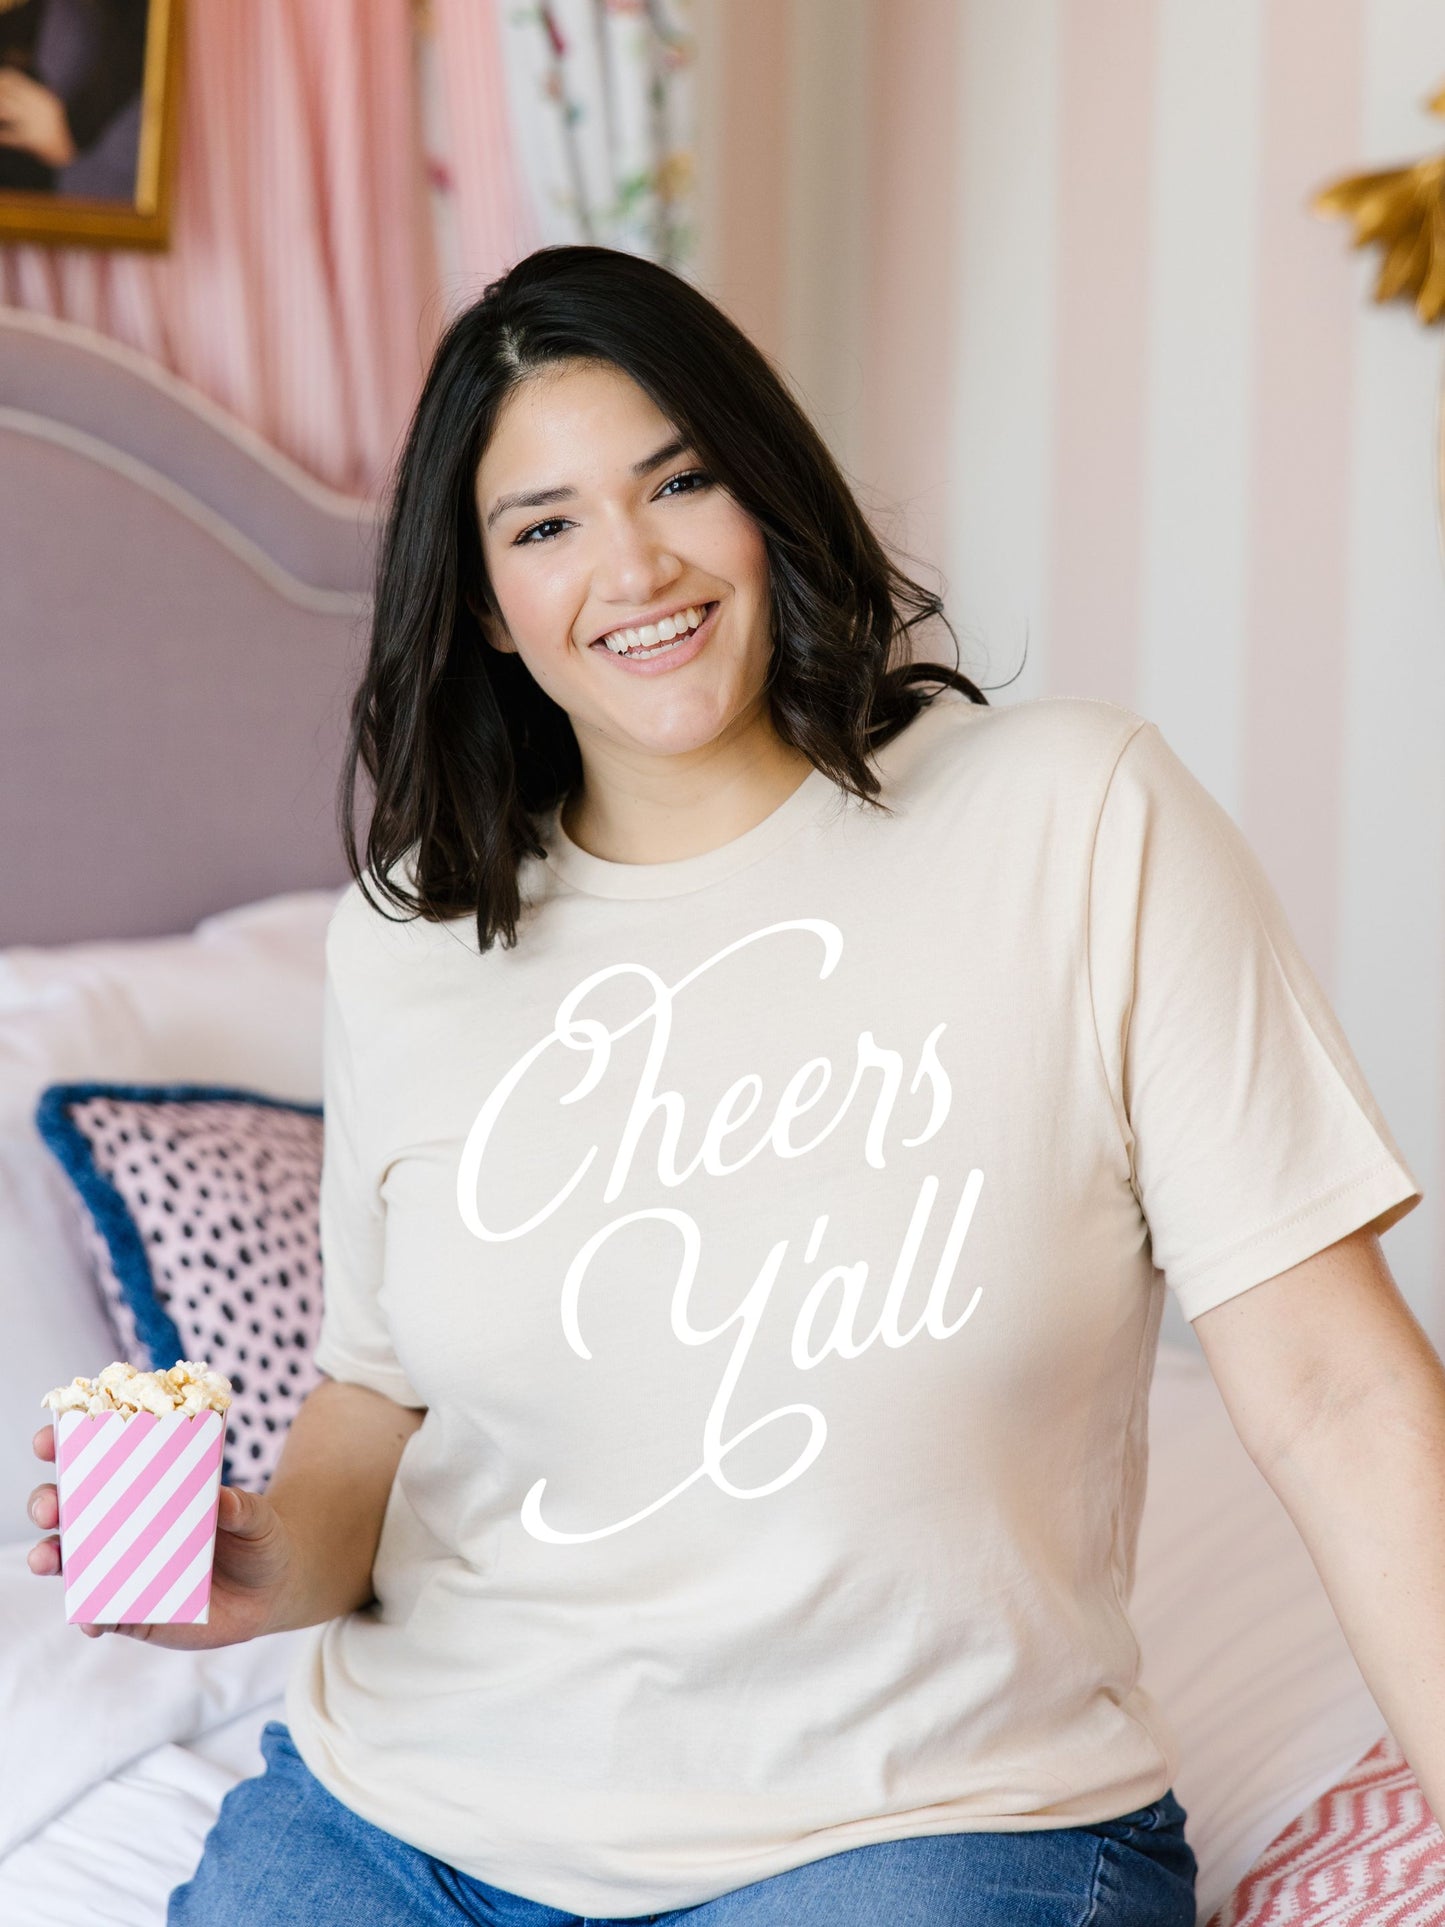 Cheers Y'all T-Shirt for women